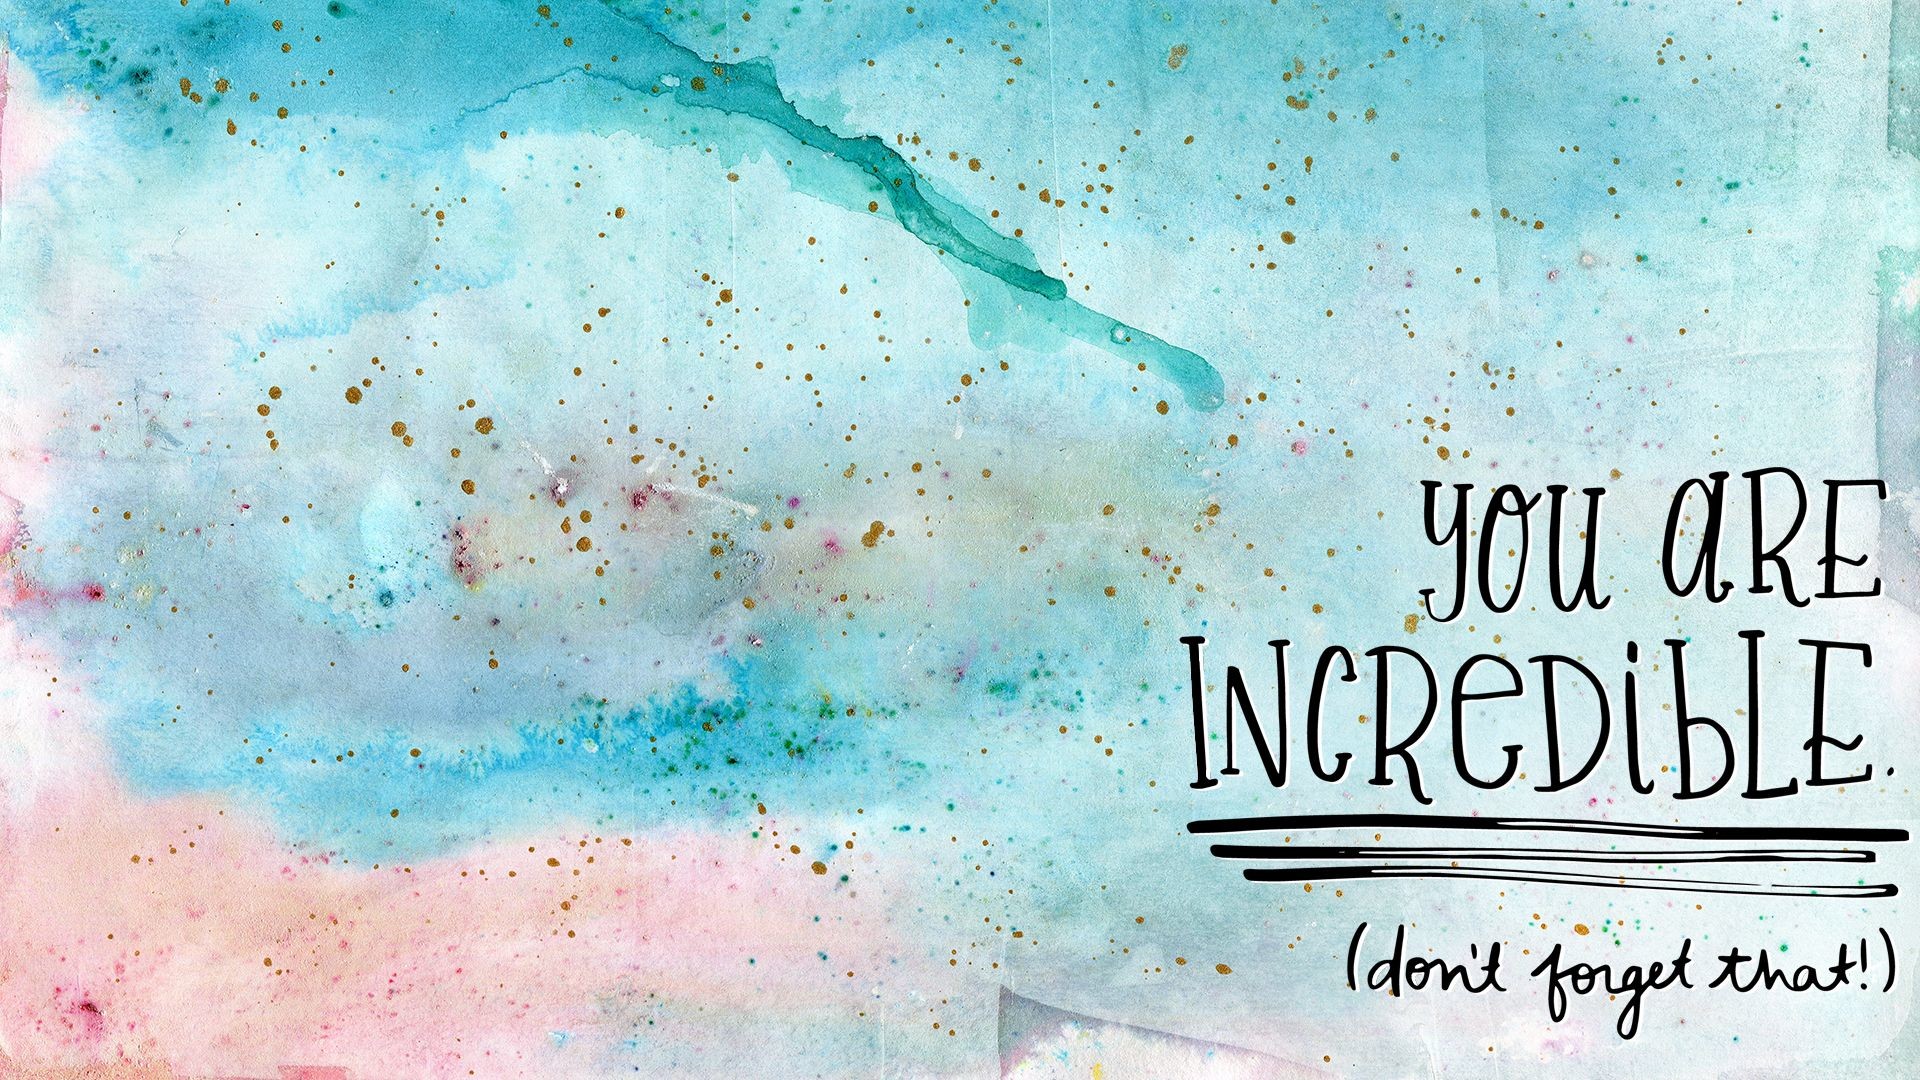 motivational wallpapers,text,watercolor paint,font,turquoise,illustration